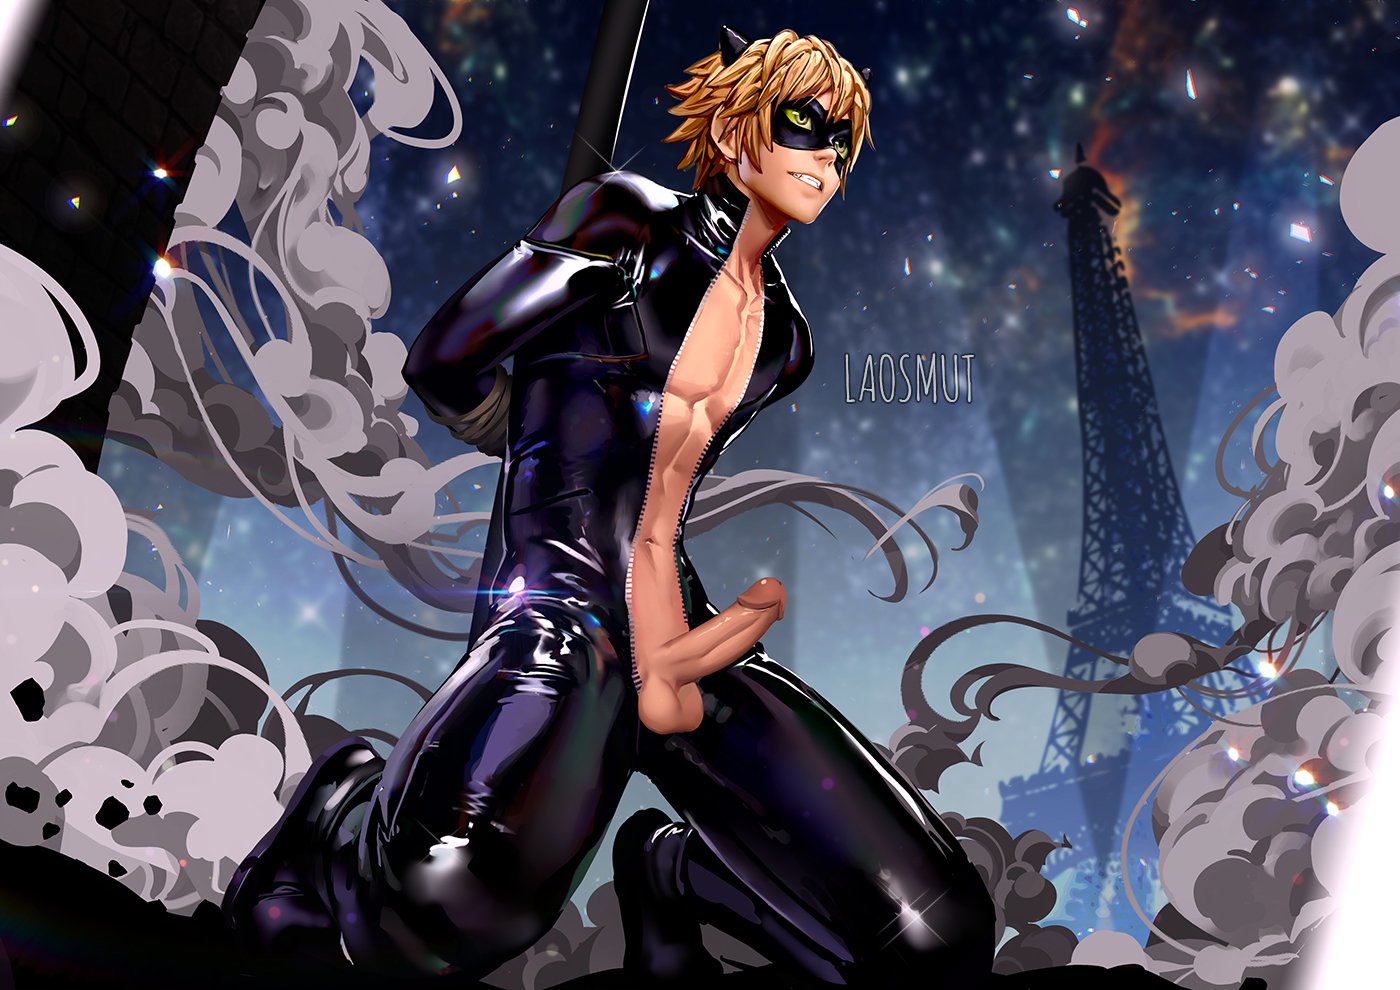 Discover the most erotic ladybug and chat noir fan art online